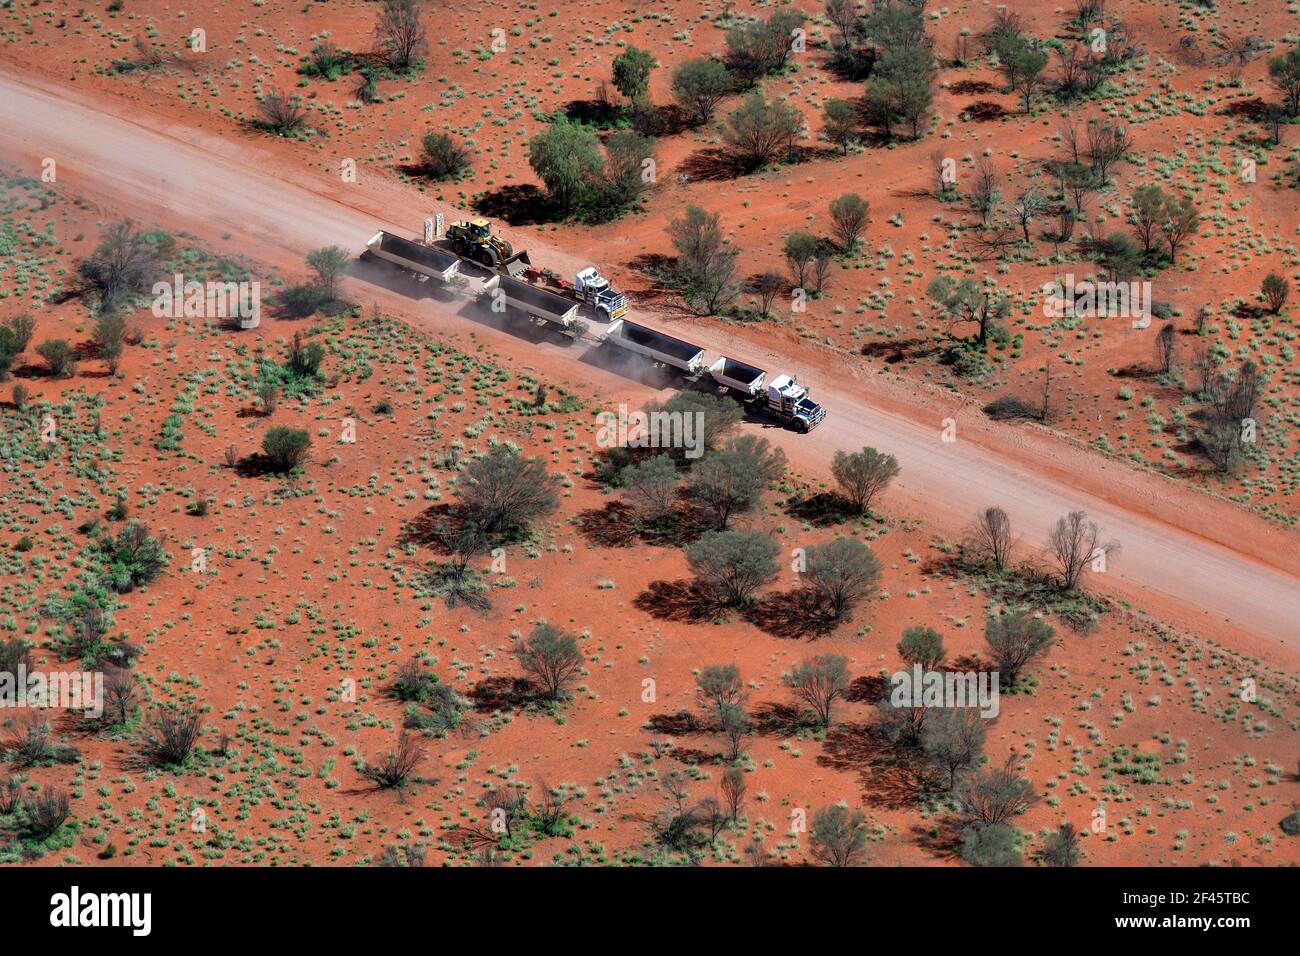 Australia, NT,  trucks with trailers on unsealed Maryvale road in outback area, Stock Photo